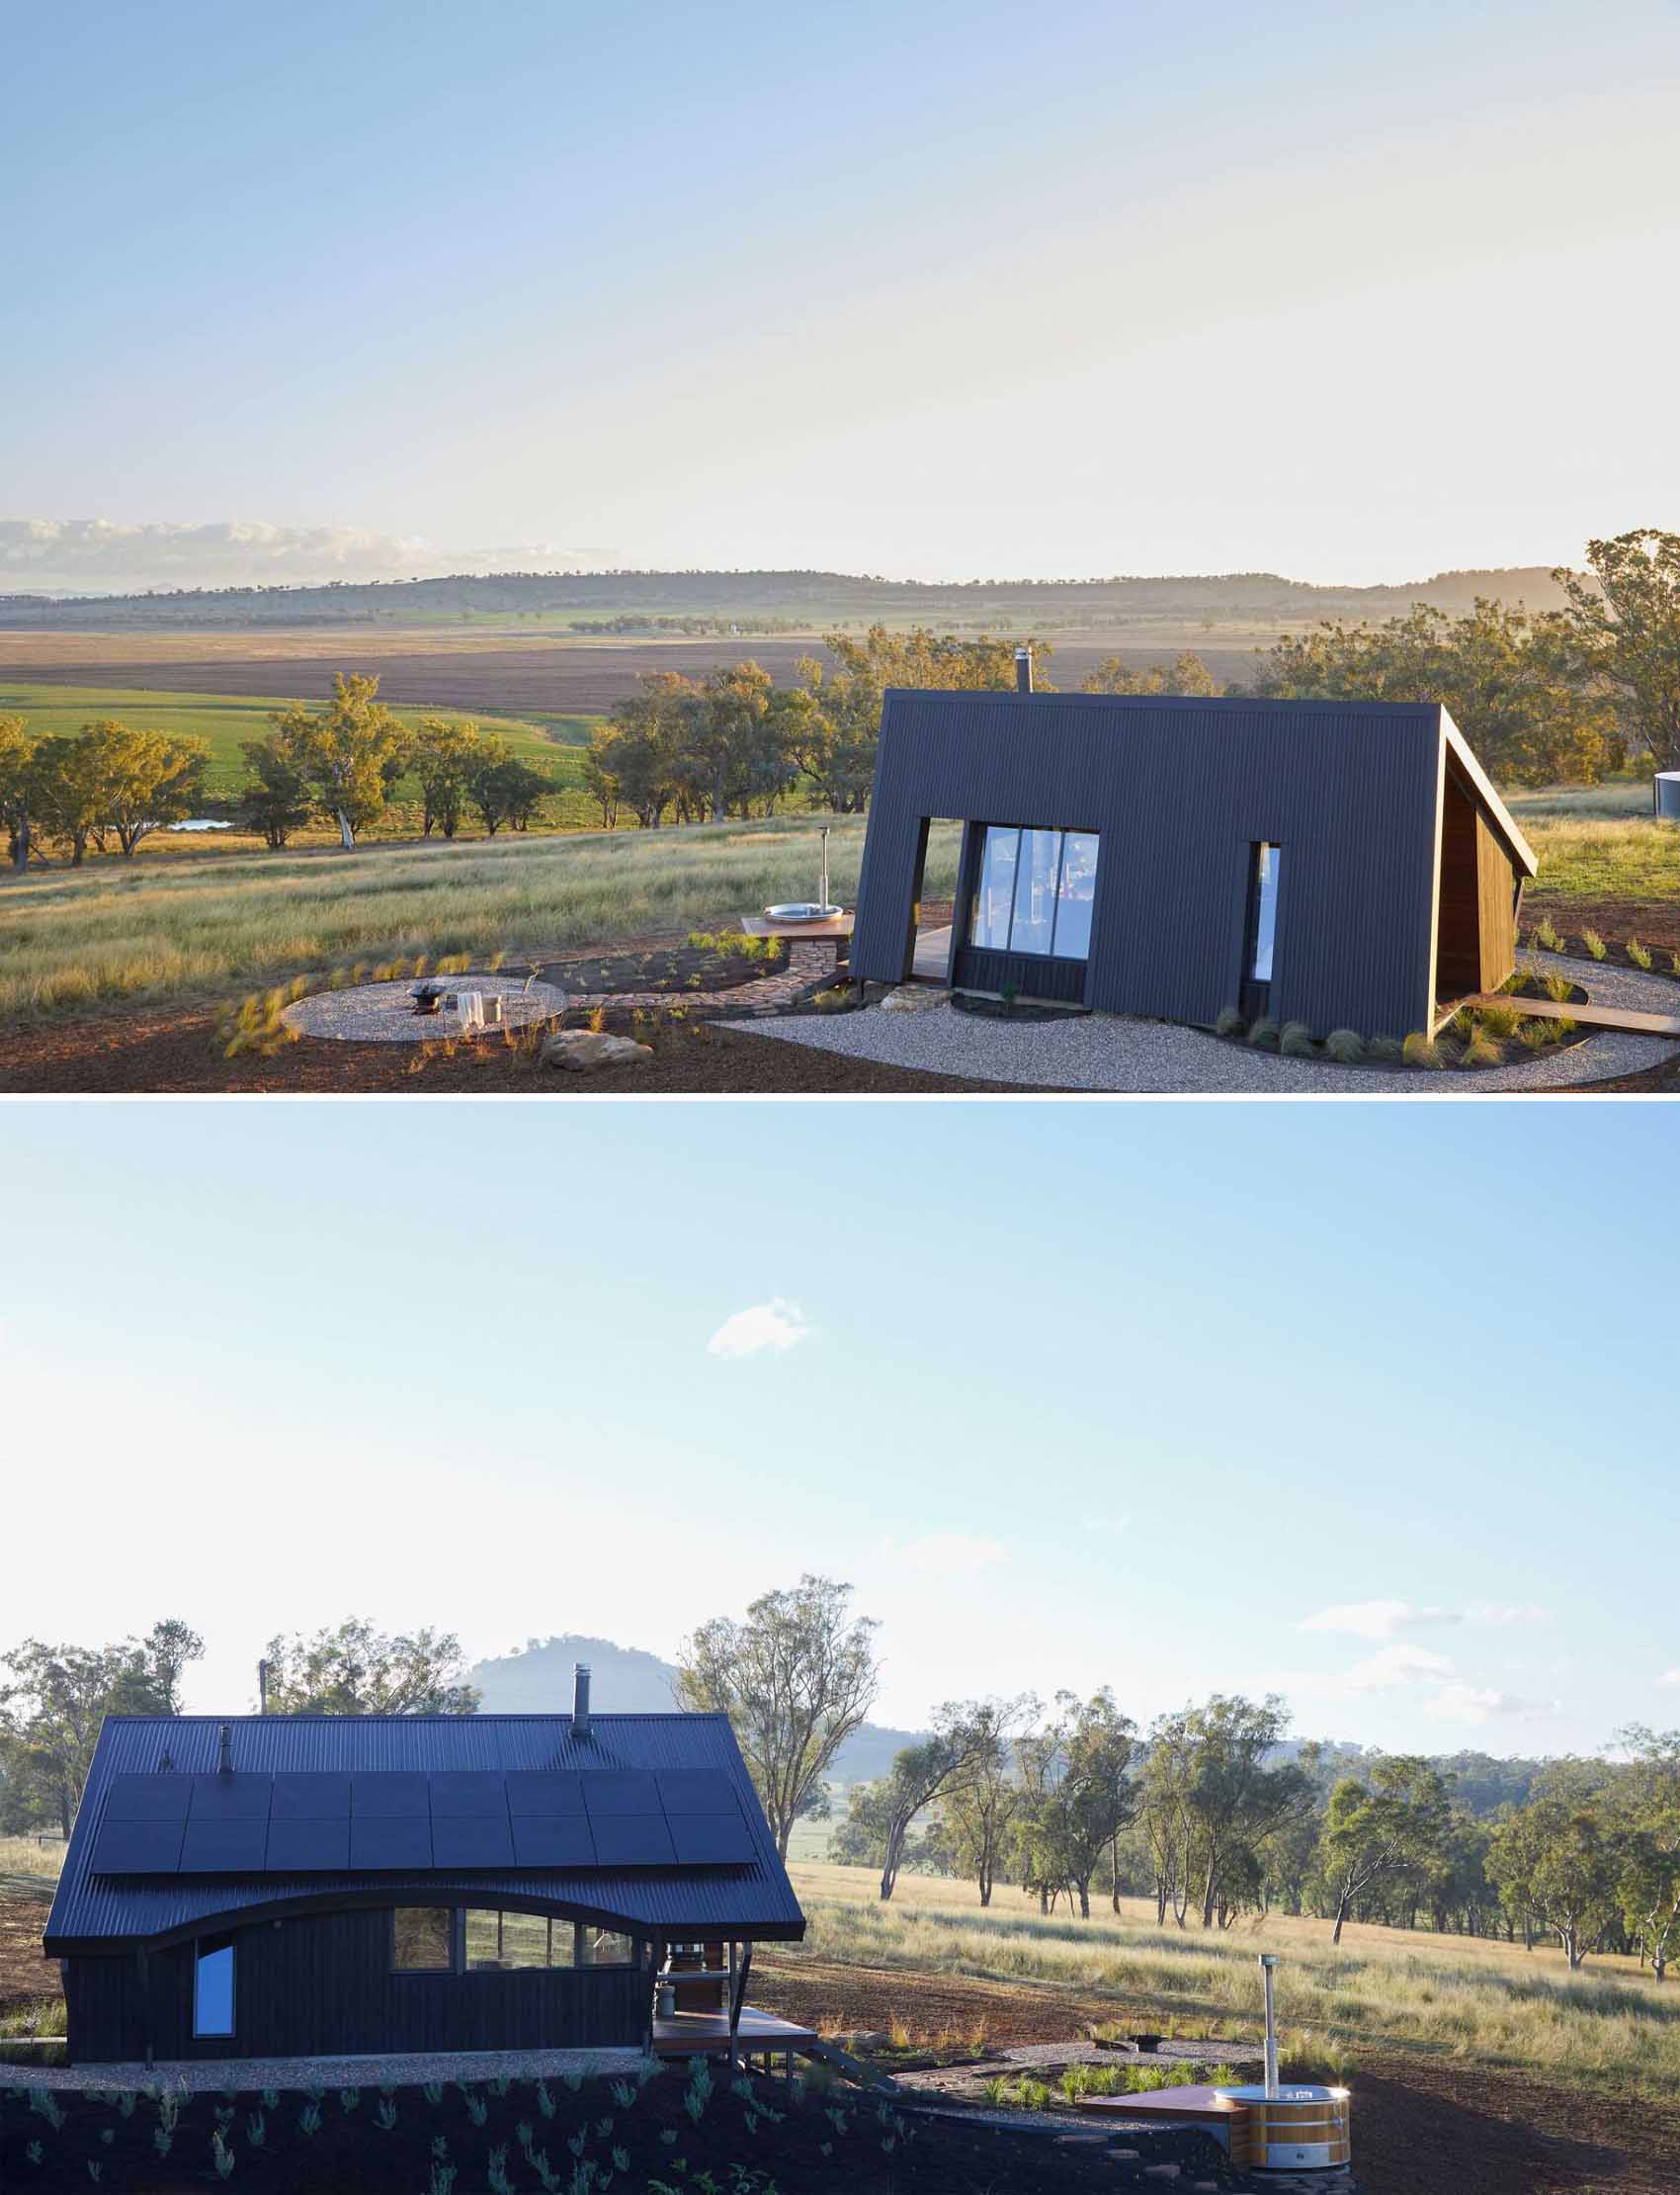 A small off-grid modern cabin that has a wrapping metal roof to protect it from the elements.